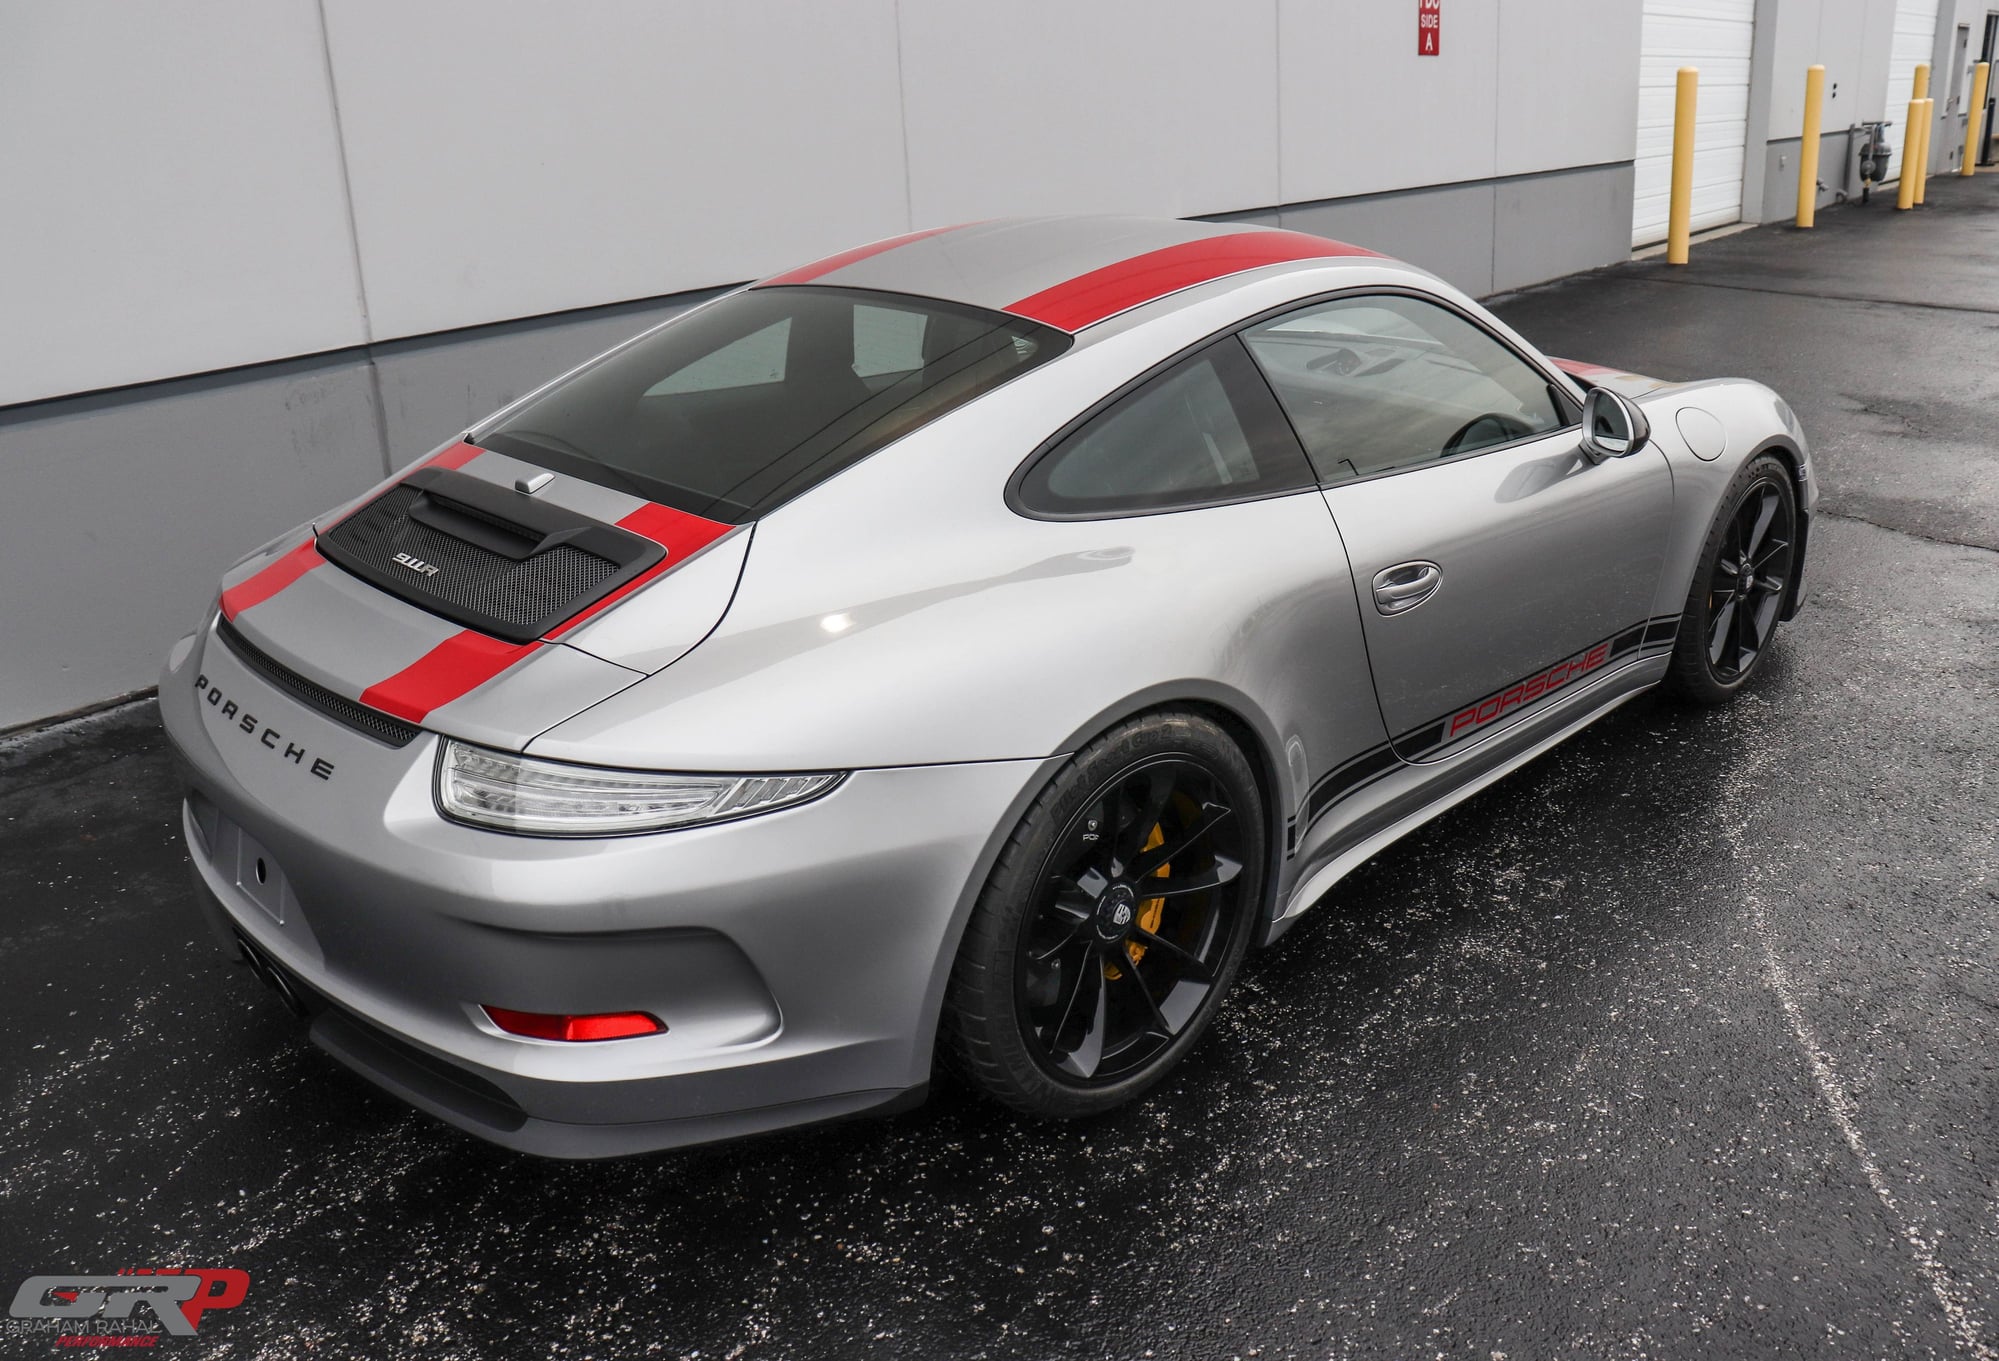 2016 Porsche 911 - 2016 Porsche 911R - CPO - Delivery Miles - Used - VIN WP0AF2A94GS195286 - 37 Miles - 6 cyl - 2WD - Manual - Coupe - Silver - Brownsburg, IN 46112, United States